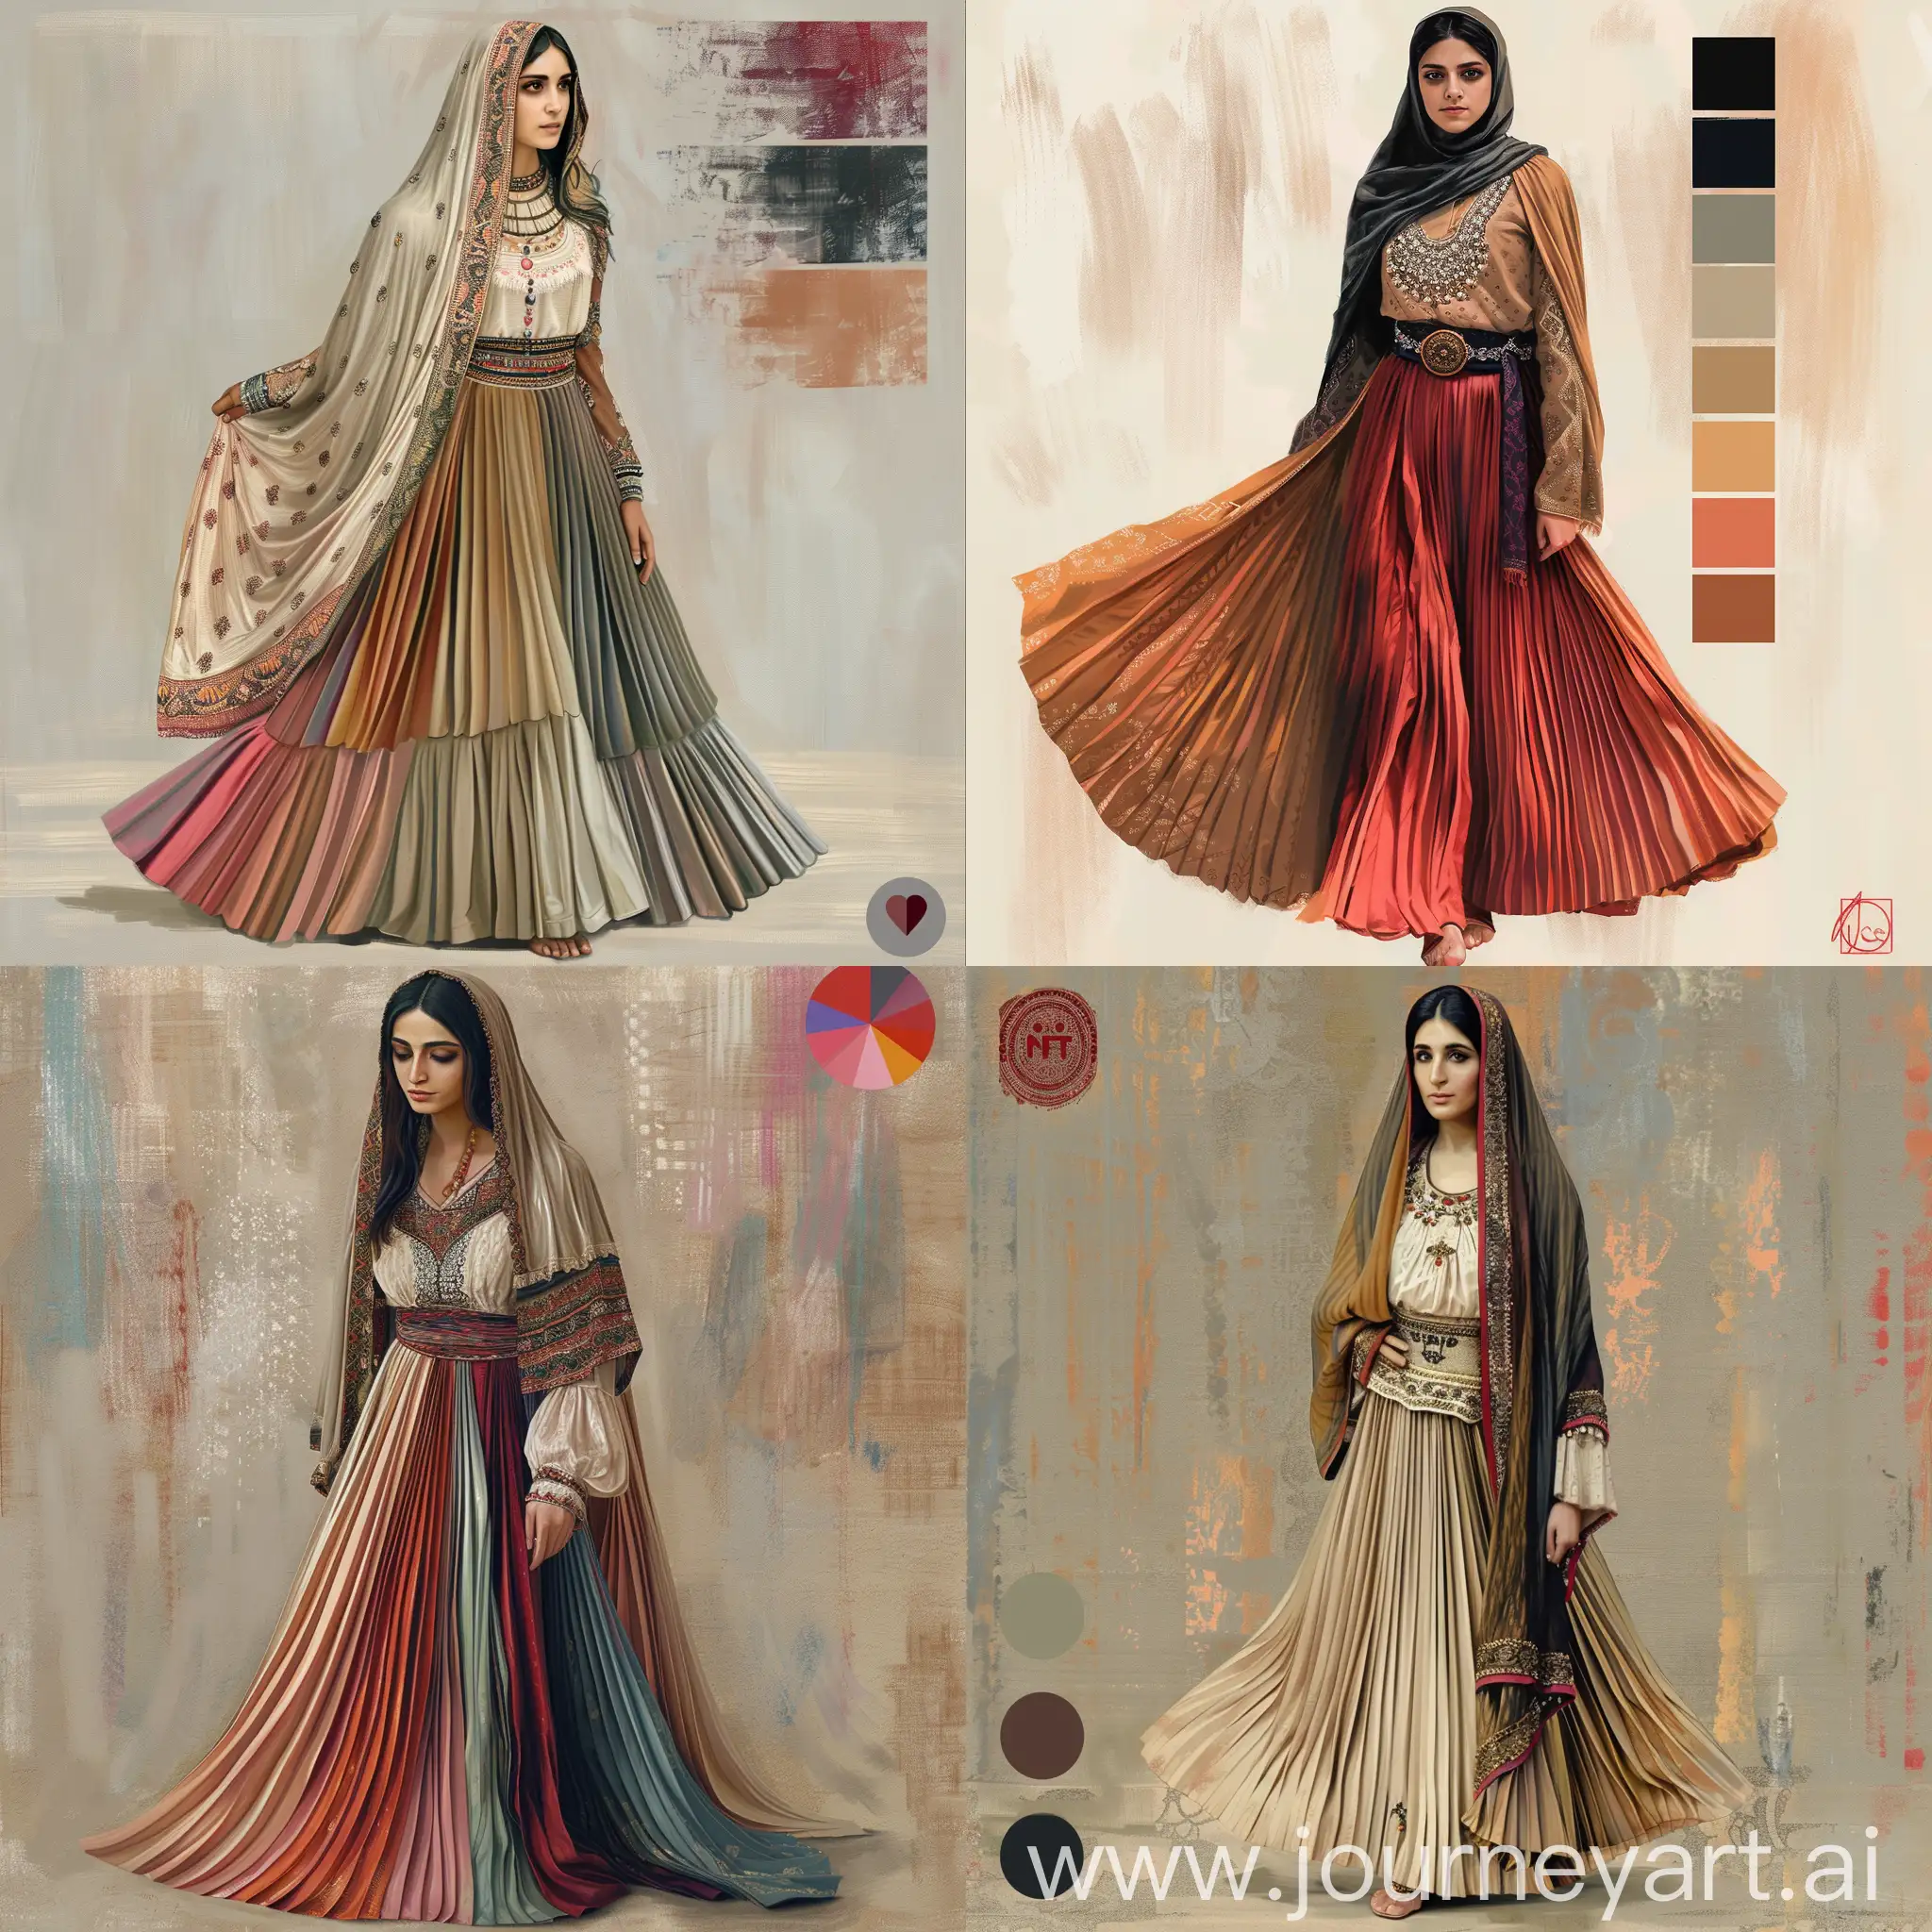   Type of Image: Digital painting, Graphic art  Description of the desired design: The image I have in mind for the NFT is of a woman in a beautiful traditional Bakhtiari outfit, one of the authentic Iranian ethnic garments including a chador, lachak, shirt, and long pleated skirt. This outfit features very beautiful designs and colors. The Bakhtiari chador is made of delicate fabric and adorned. Bakhtiari women's hair is split open on both sides of the face and flows over their shoulders. The lachak and clothing of Bakhtiari women are decorated with needlework and embroidery. These women have adorned their outfits with jewelry to enhance their beauty. The long and pleated skirts of these women are made of high-quality fabric and vibrant, energetic colors.   My sales goal is to target women and enthusiasts of identity, culture, and history. My aim is to showcase the authenticity and beauty of Bakhtiari local attire and the power and beauty of Bakhtiari women.  Color palette for this design:  1. Red: 